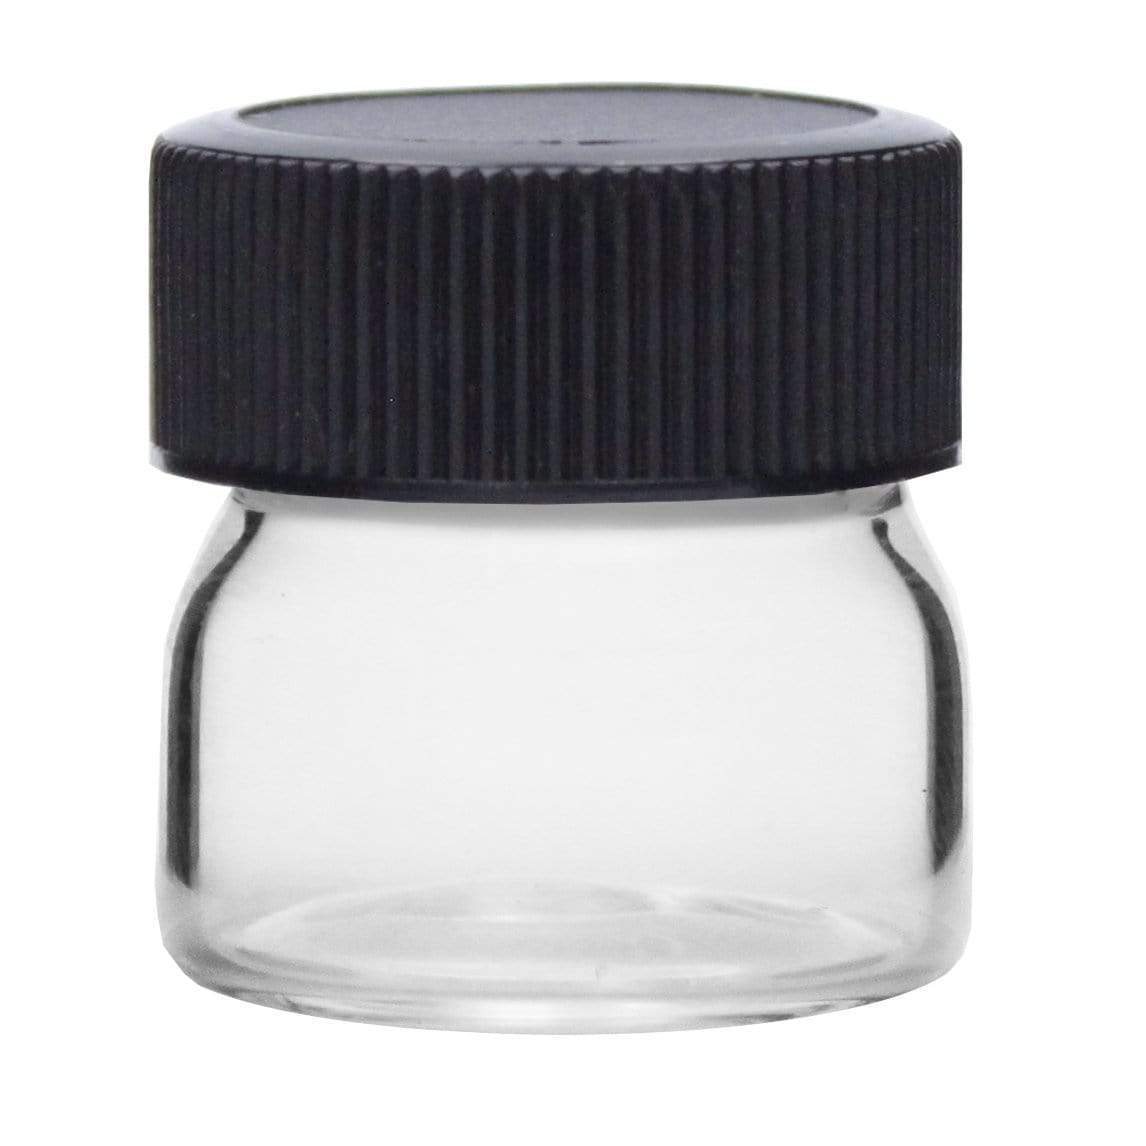 2 Dram Glass Concentrate Container